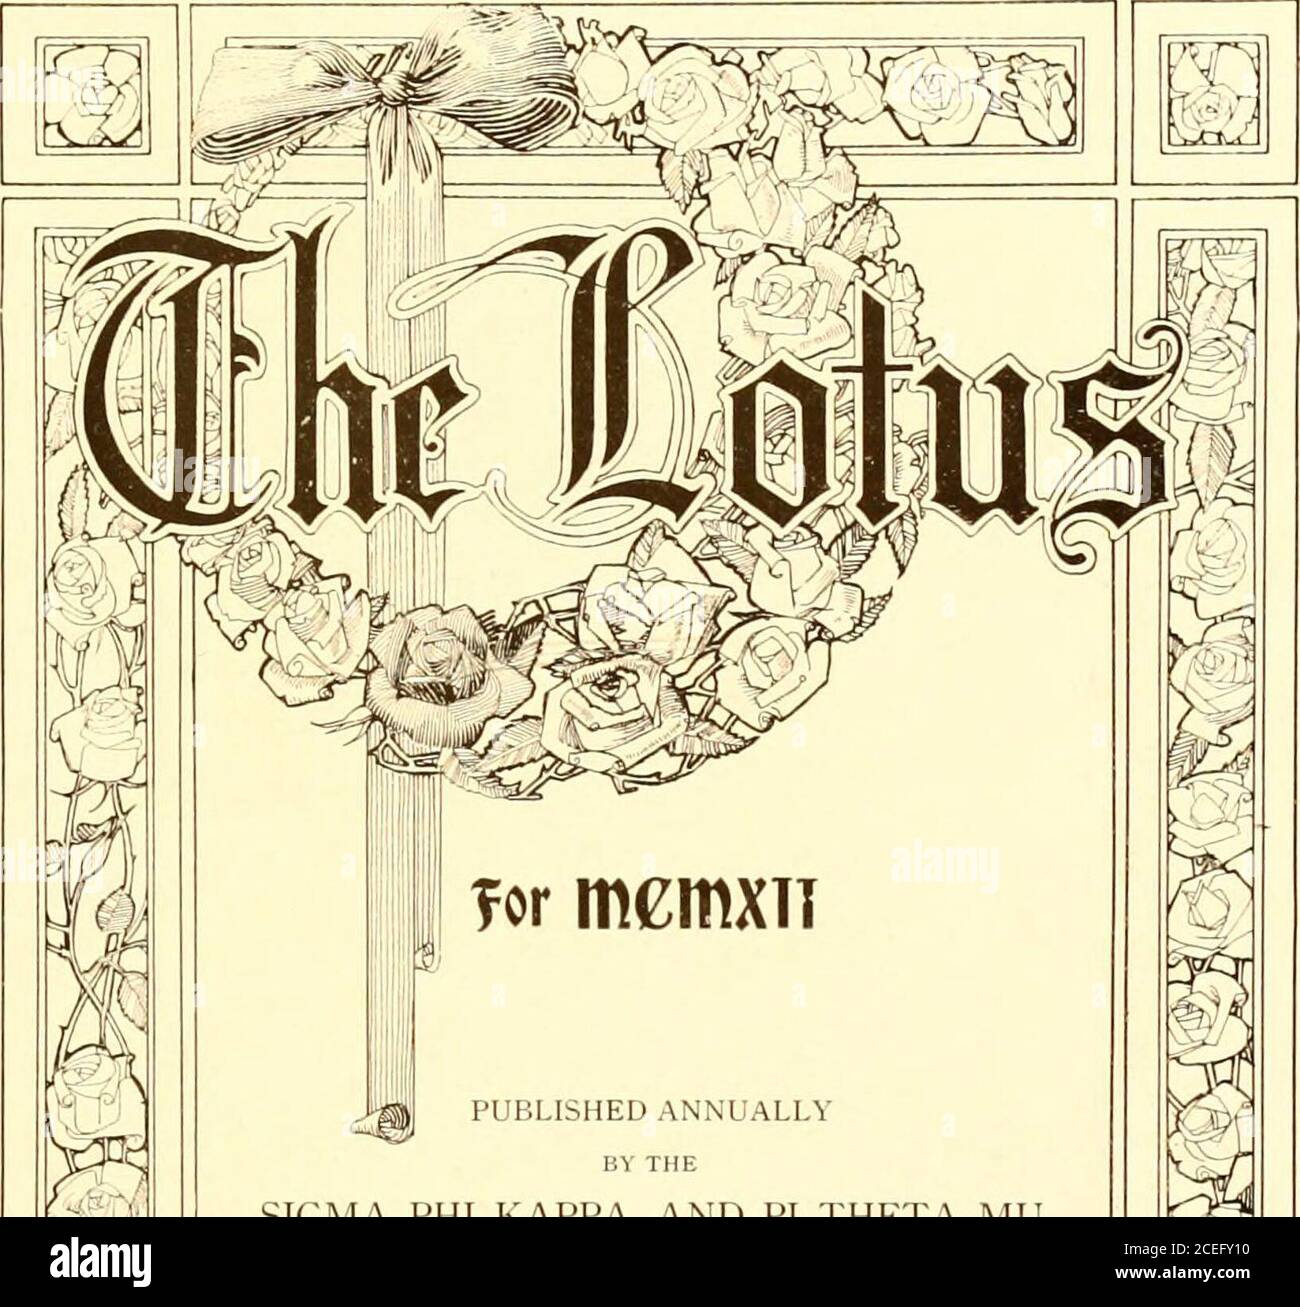 The Lotus. PUBLISHED ANNULI BY THE SIGMA PHI KAPPA AND PI THETA MULITERARY SOCIETIES OF Peace Institute Raleigb, north Carolina ^ m Digitized by the Internet Archive in